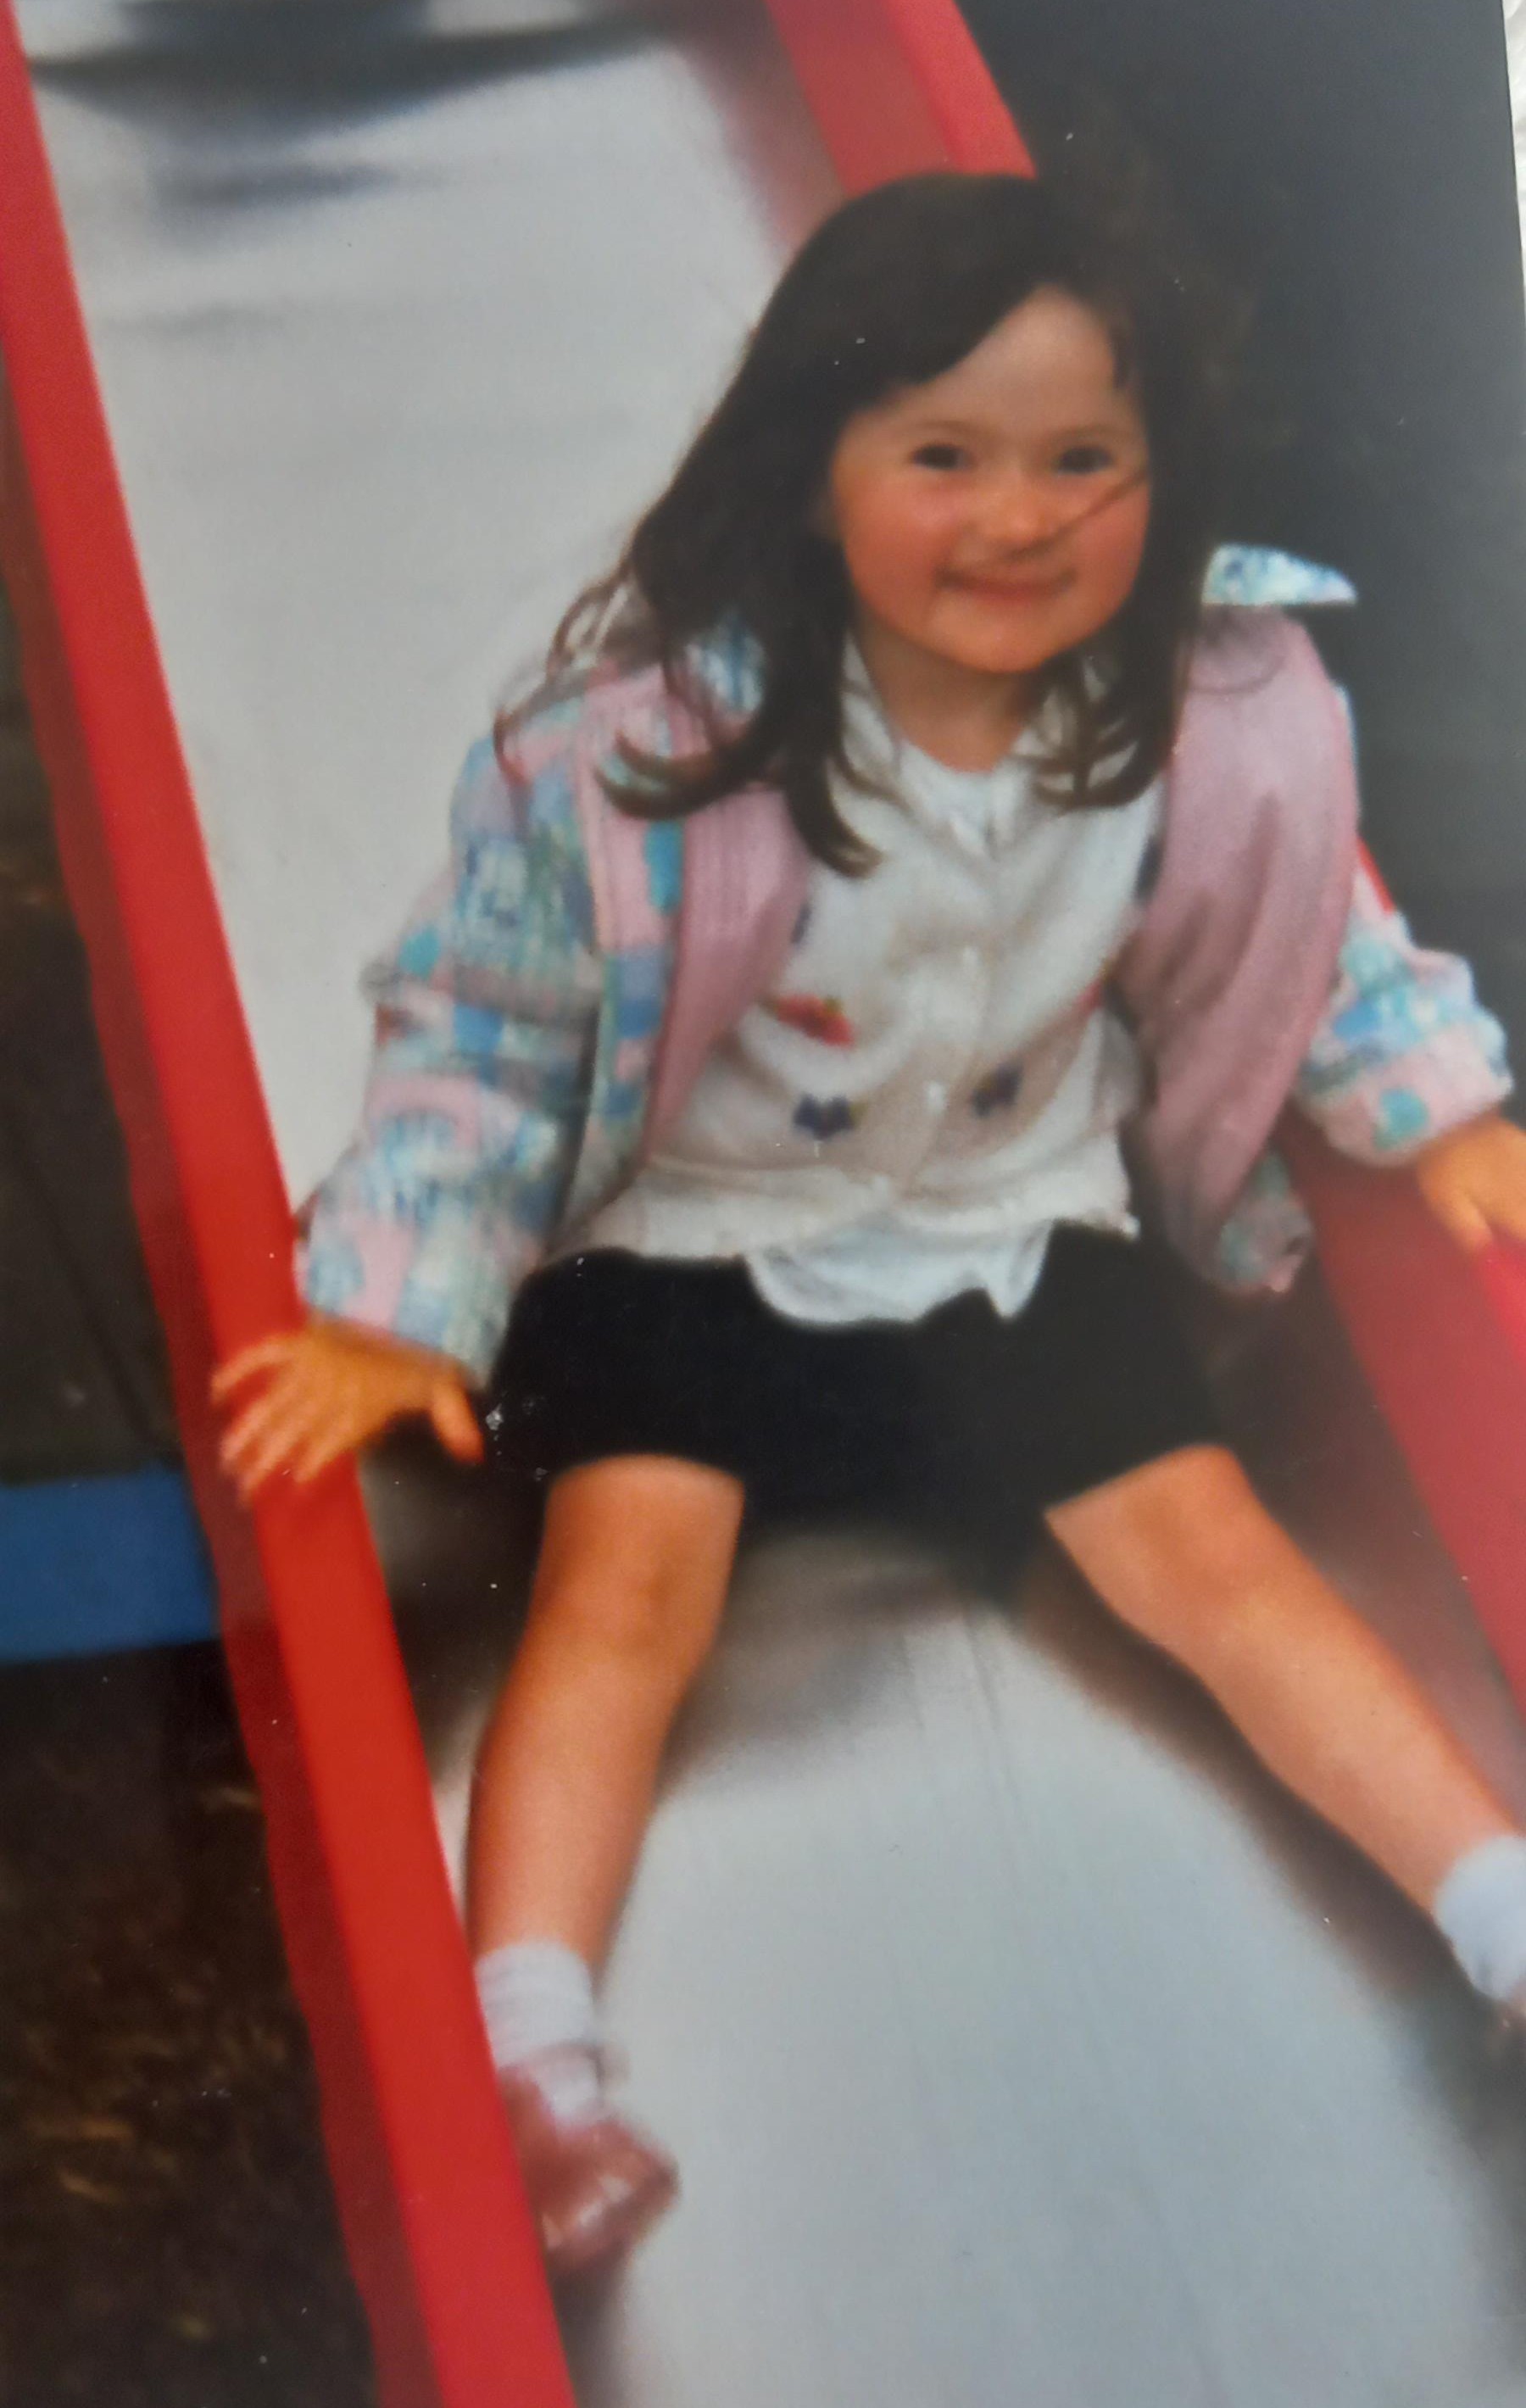 Oliver Sykes sister Amber as a child on a slide in Chapel en le Frith, who was the inspirtion for the character Kezia